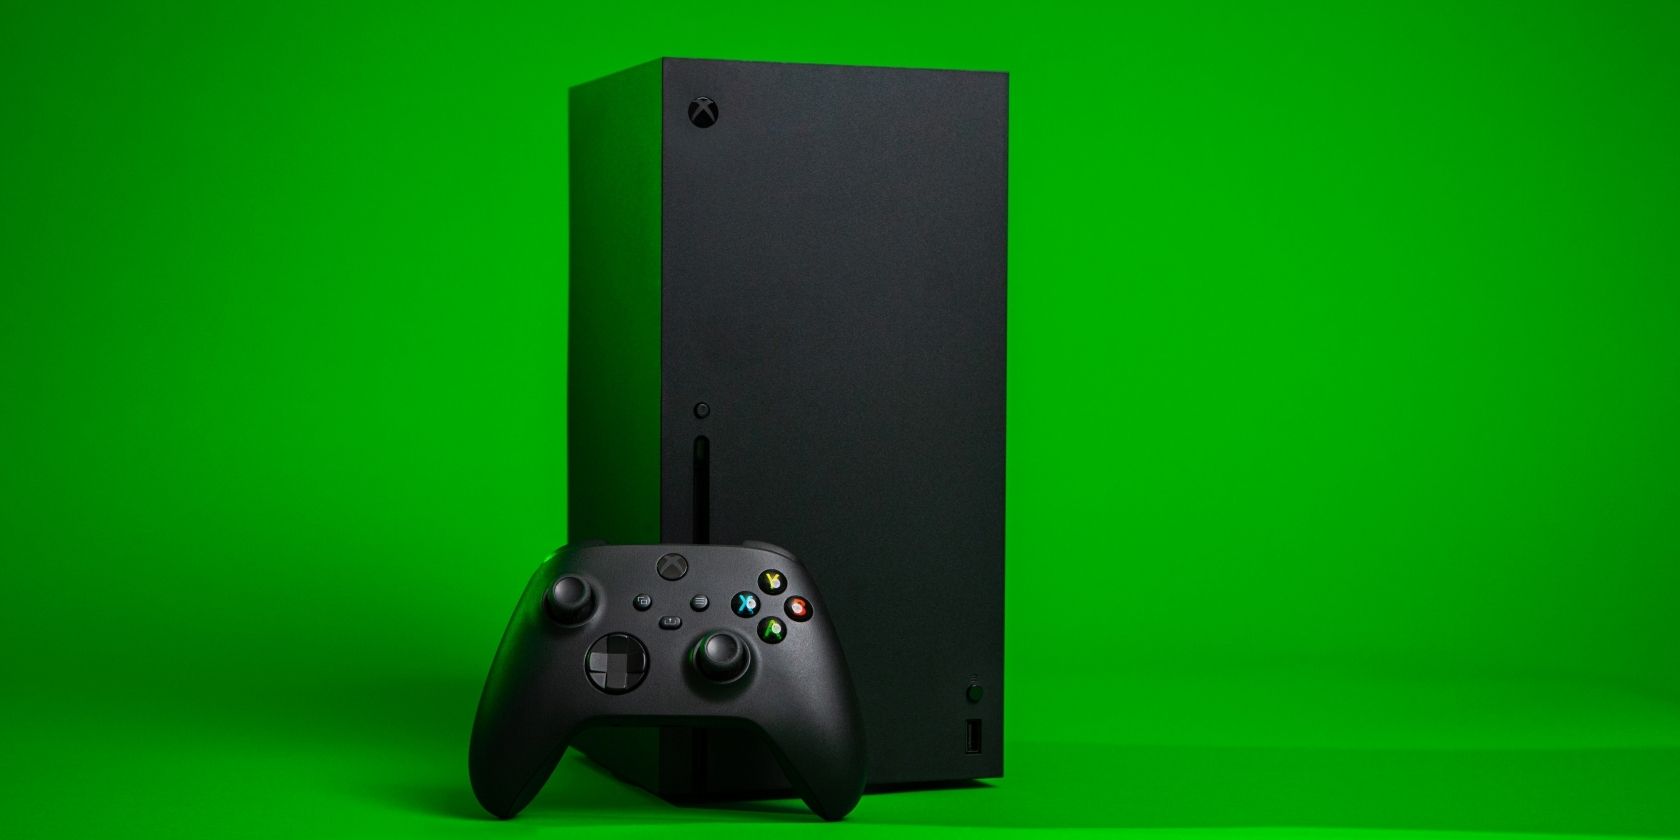 A photograph of an Xbox Series X console and controller in front of a bright green background